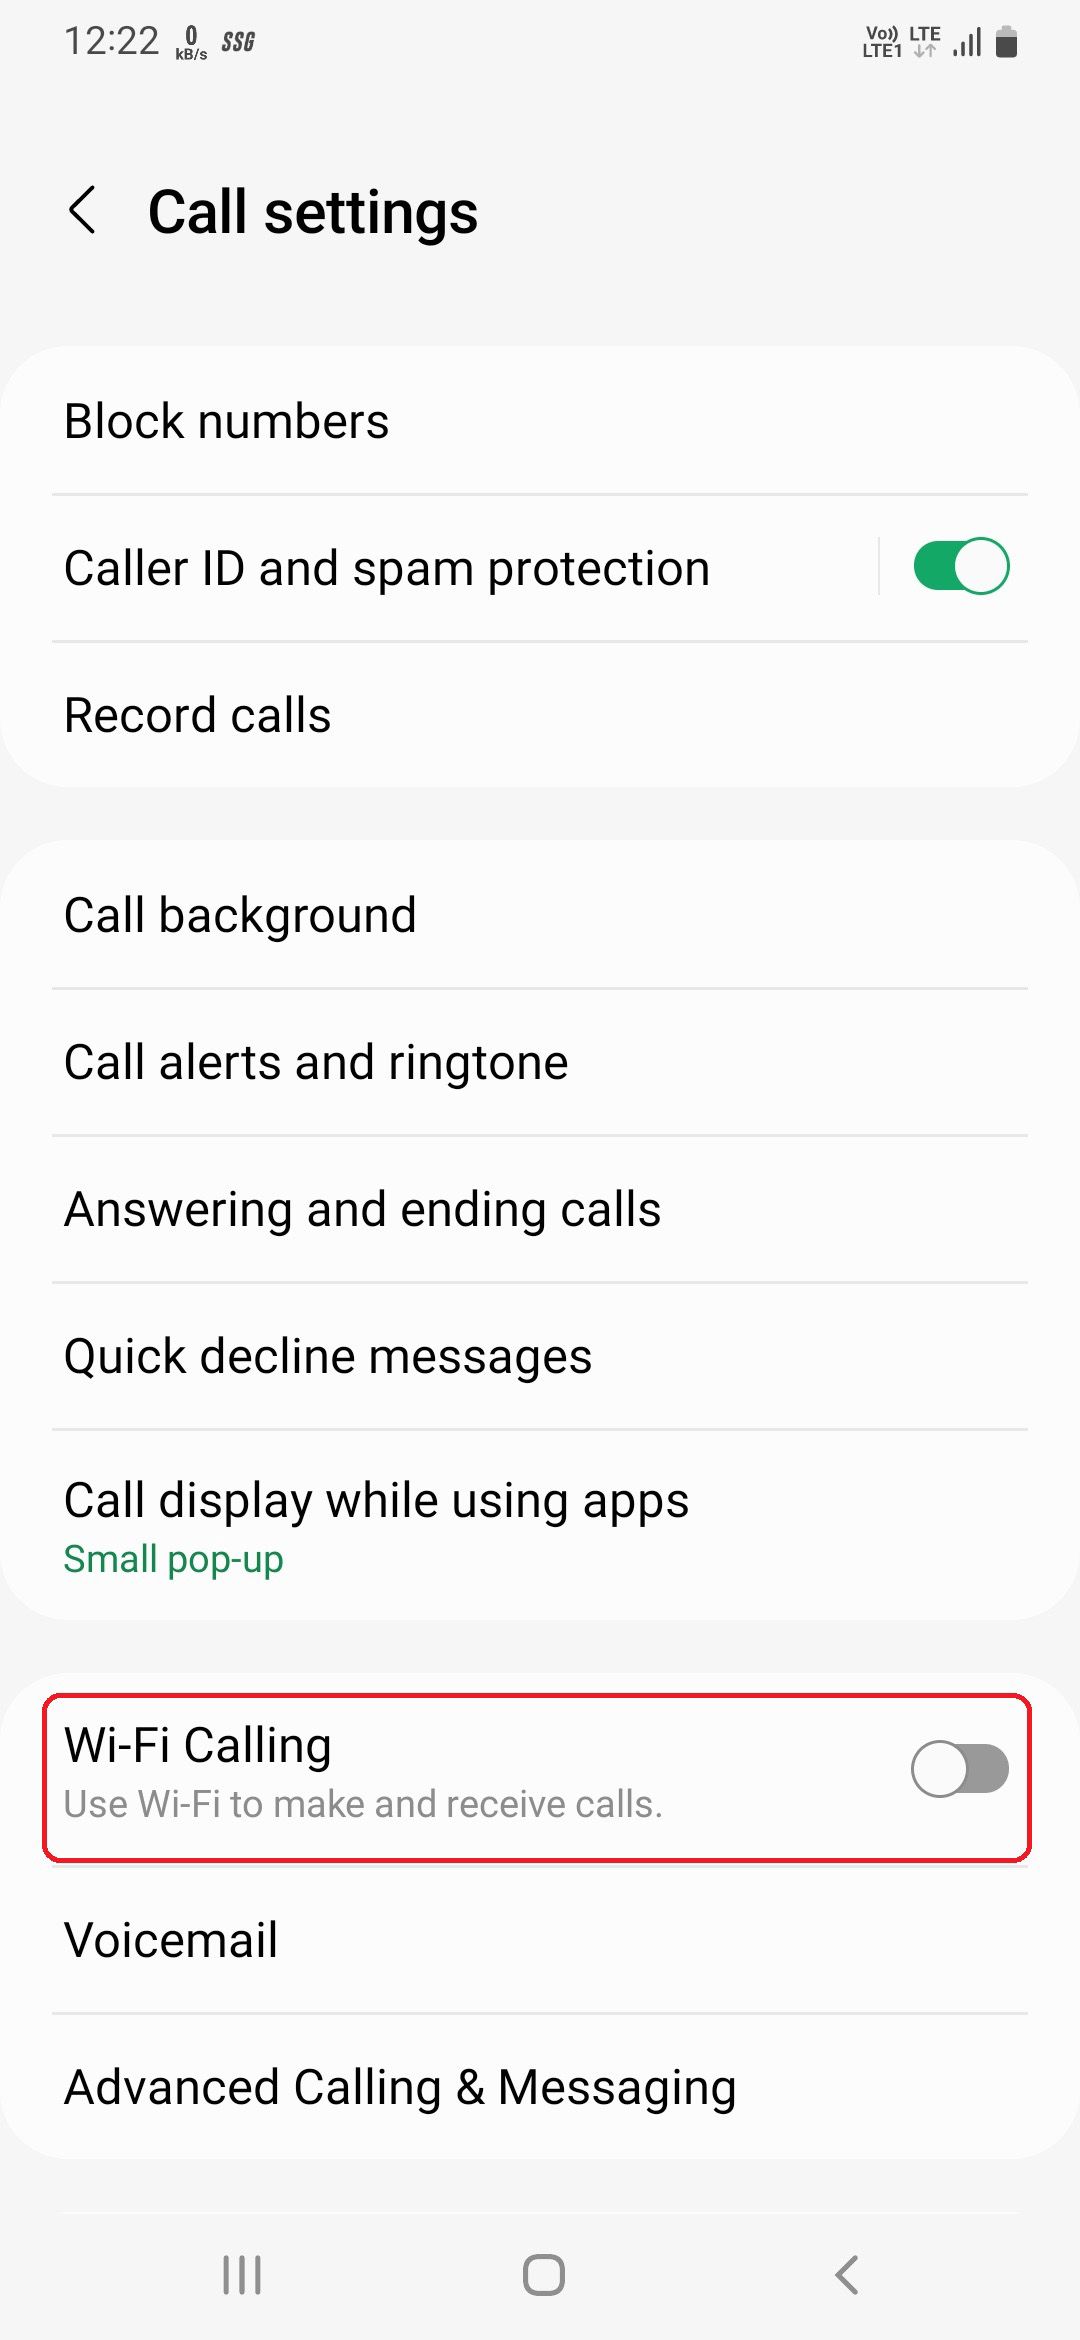 Toggle to enable Wi-Fi calling